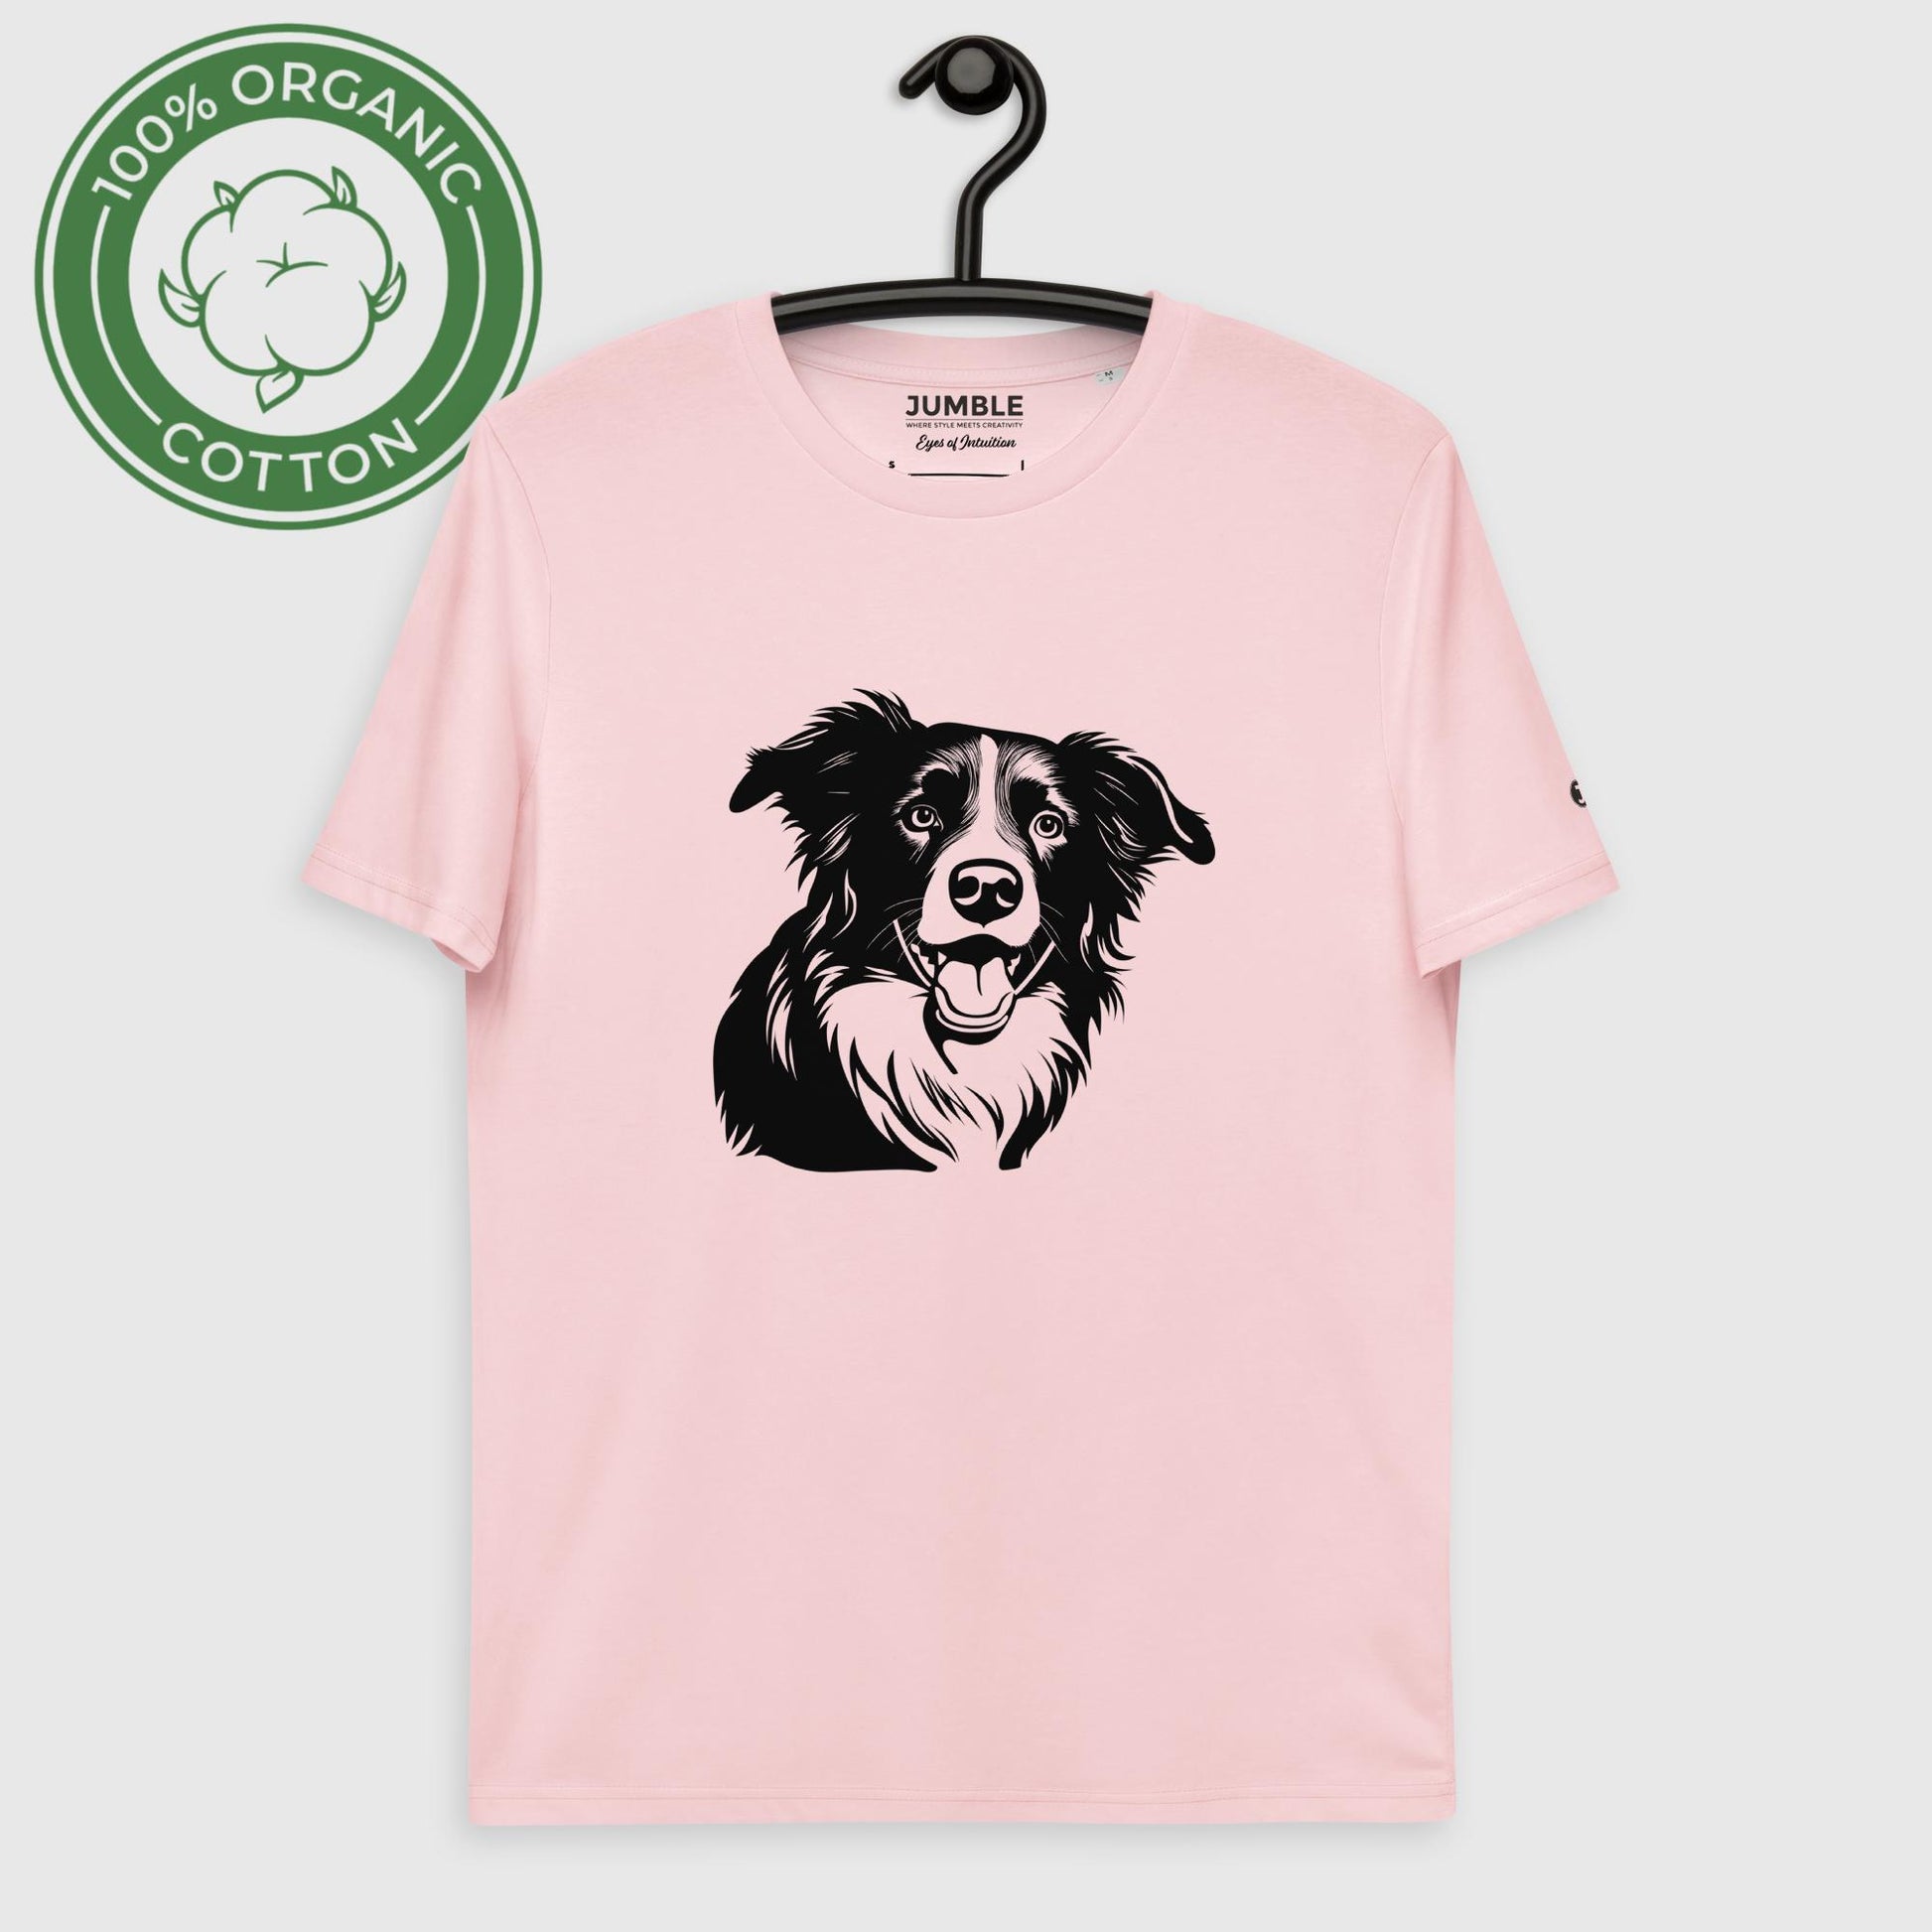 Eyes of Intuition Unisex organic cotton t-shirt, cotton pink. On hanger